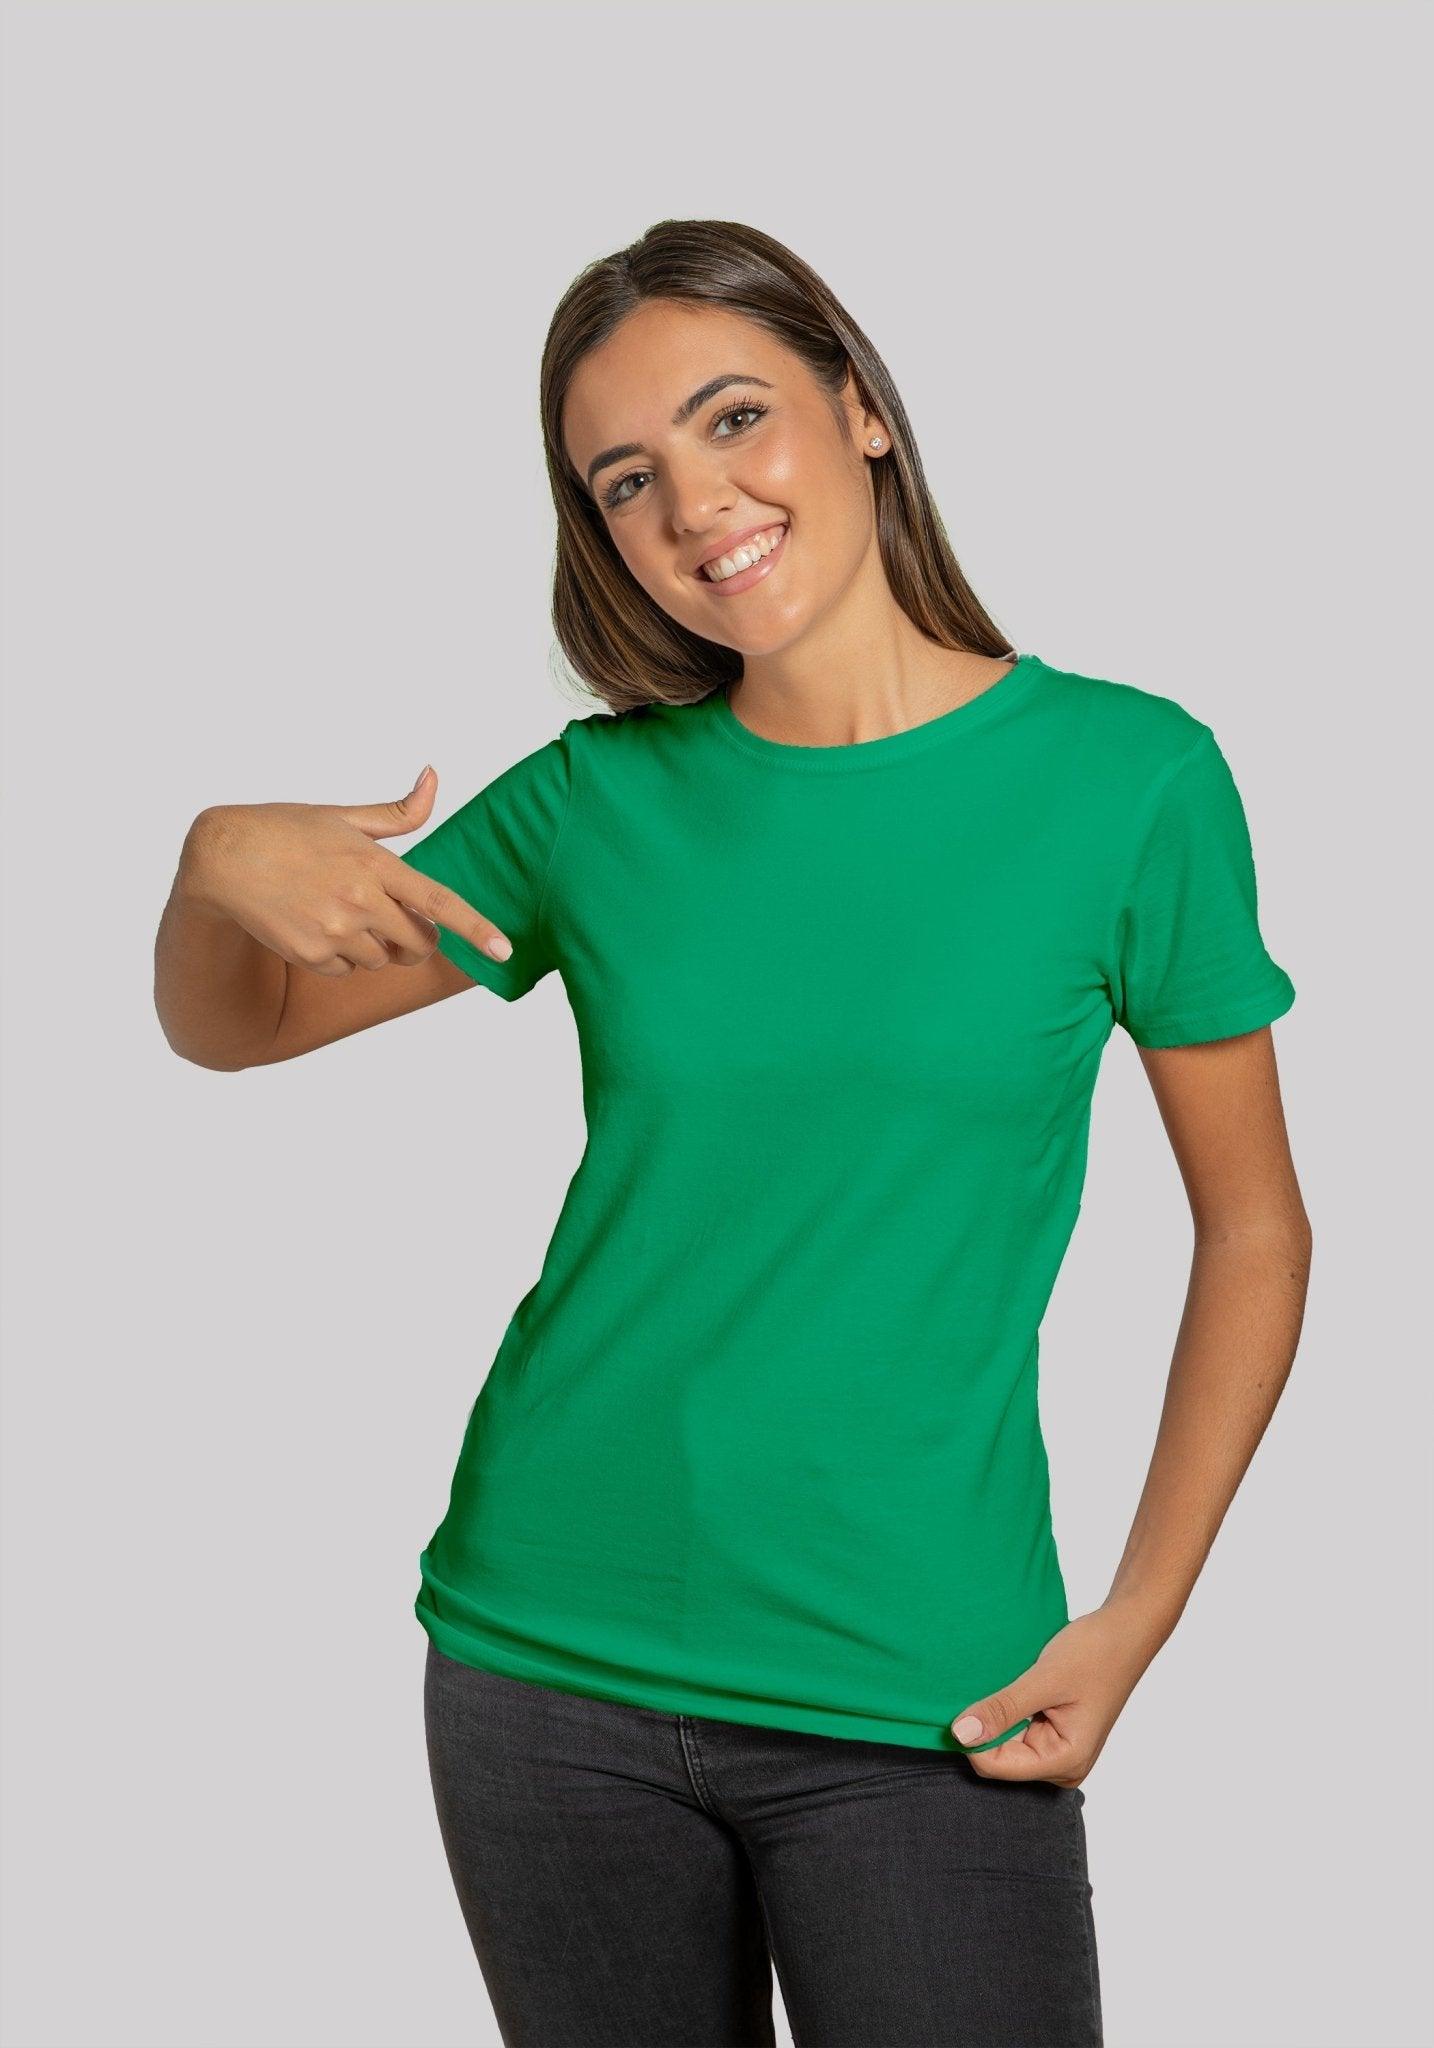 Solid Plain T Shirt  For Women In Spanish Green Colour Variant